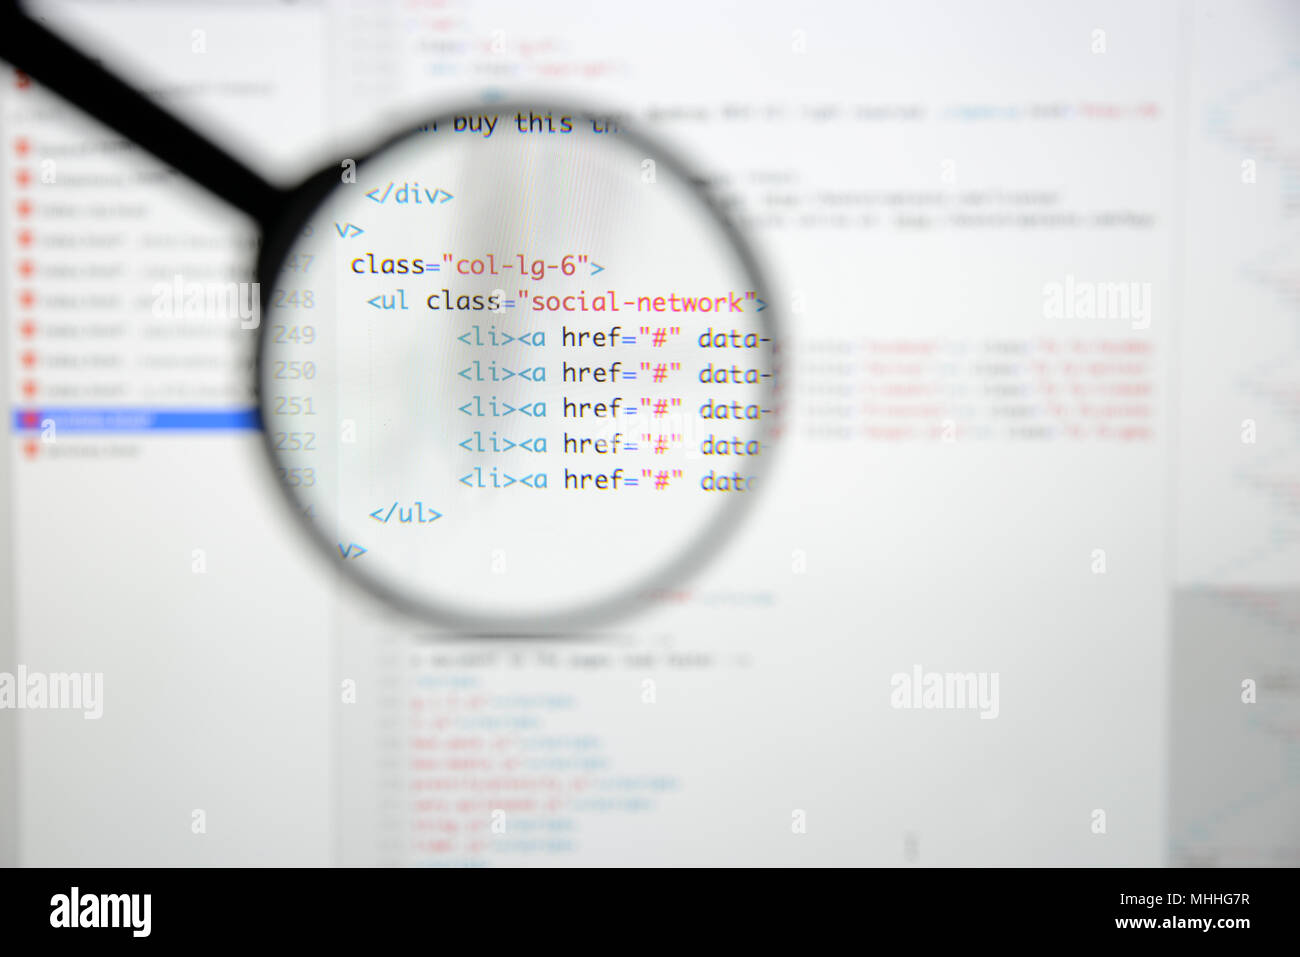 Real Html code developing screen. Programing workflow abstract algorithm concept. Lines of Html code visible under magnifying lens. Stock Photo